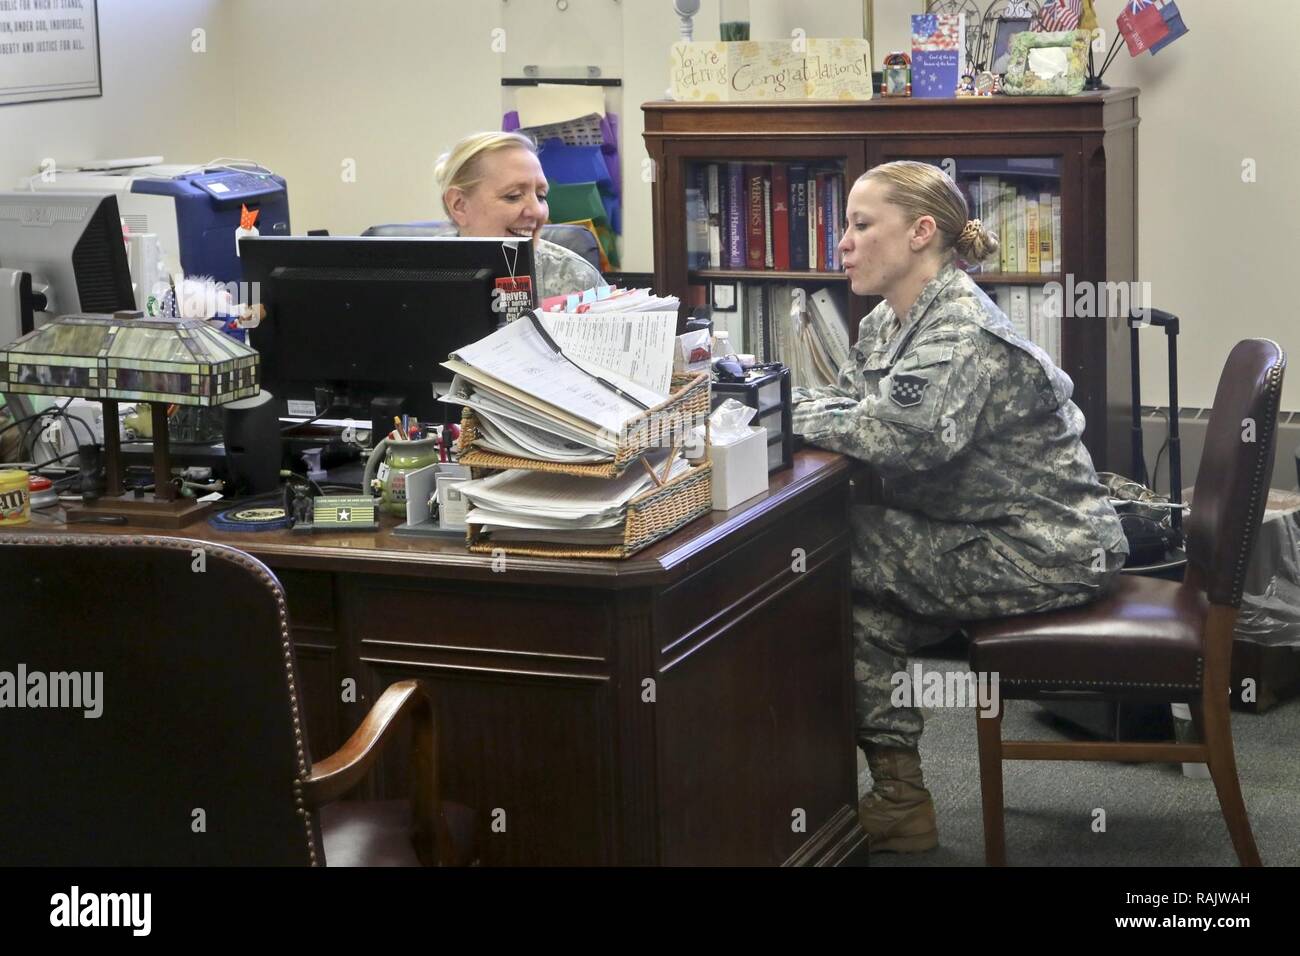 Army Sgt. 1st Class Deborah Hartman of the 318th Press Camp Headquarters speaks with Army Staff Sgt. Carrie Castillo during her last day as the unit administrator during the 318th battle assembly weekend, Forest Park, Ill., February 11, 2017. Stock Photo